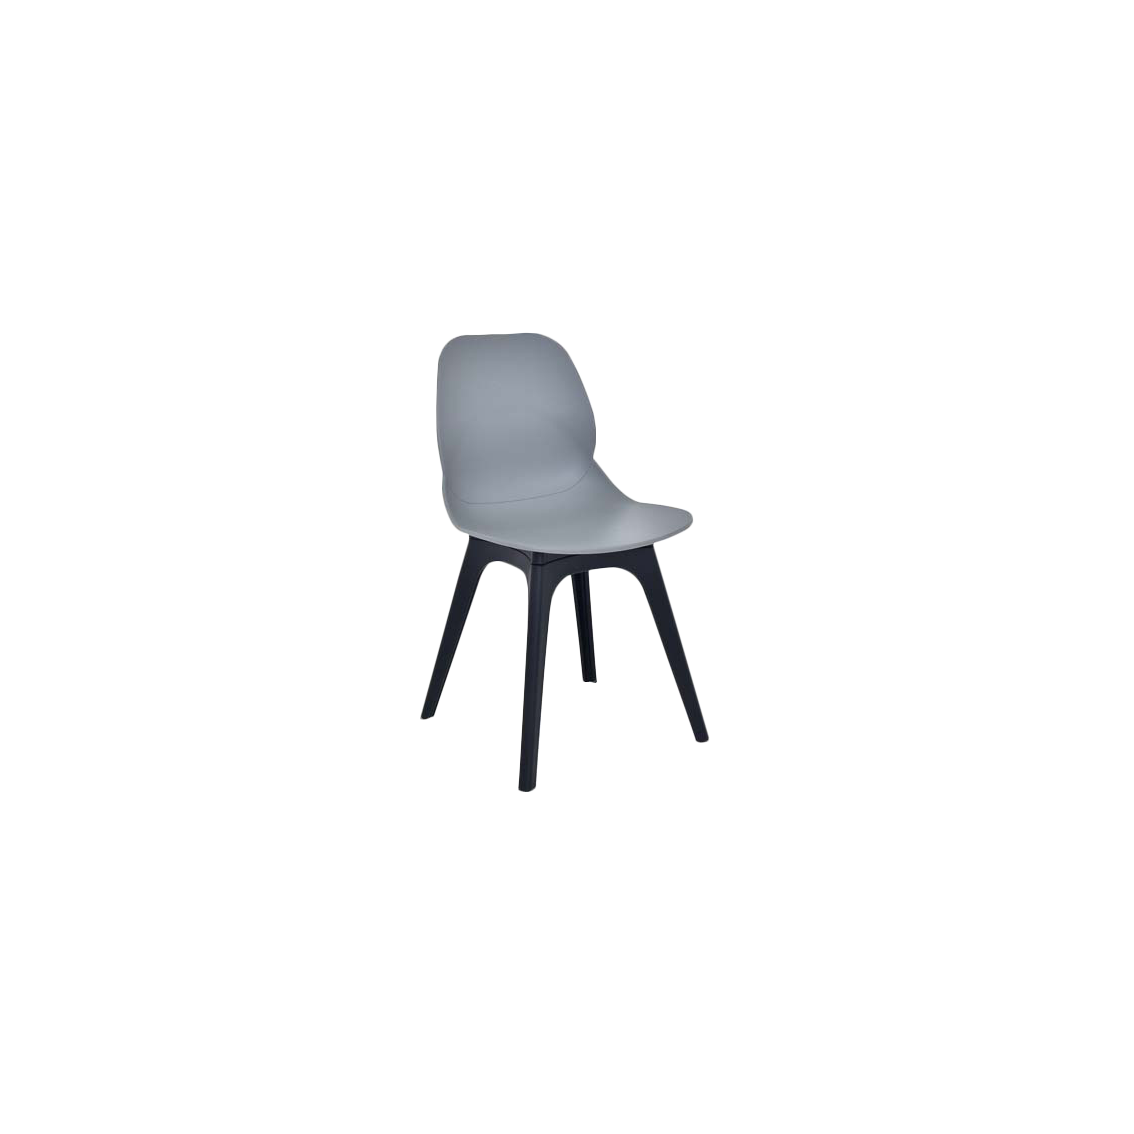 Inco Cafe Chair